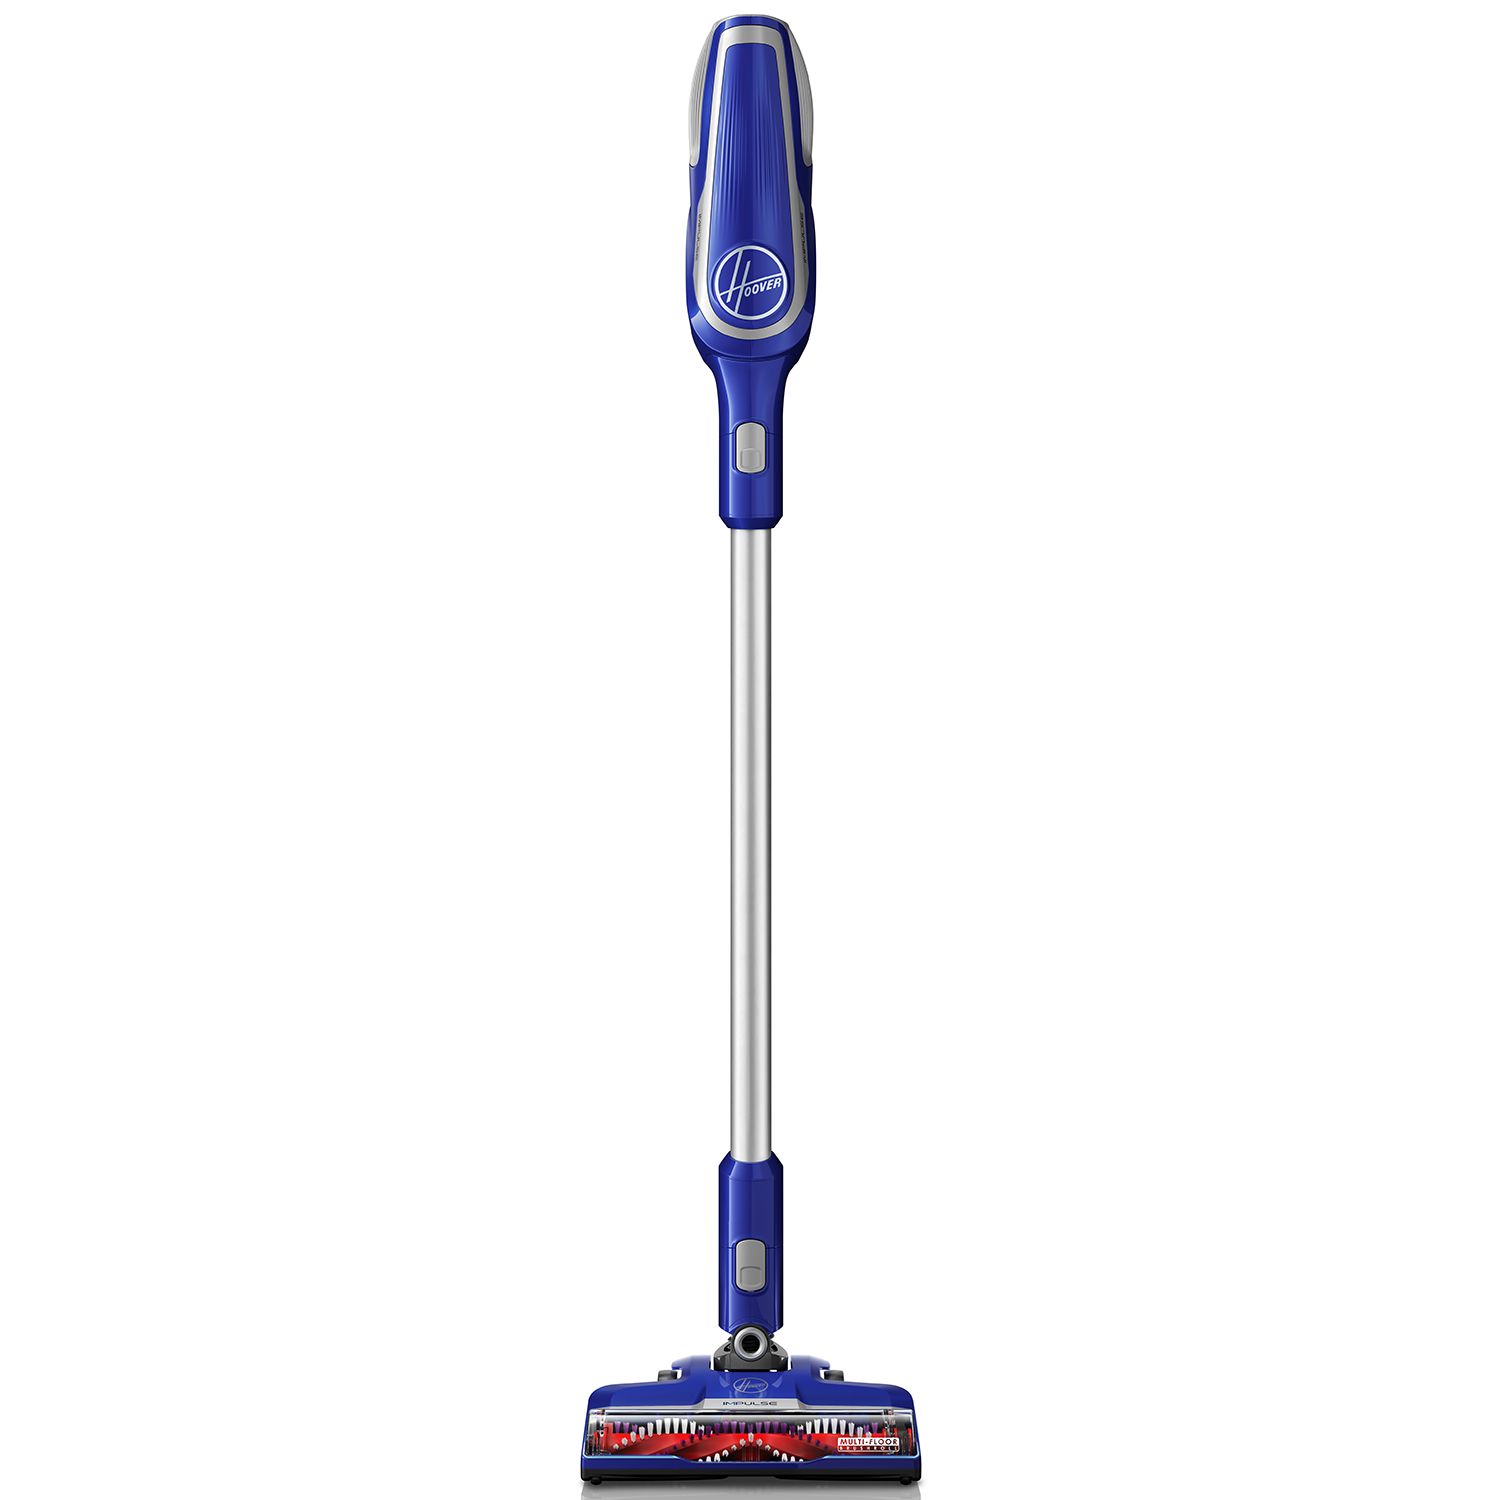 Image for Hoover IMPULSE Cordless Vacuum at Kohl's.